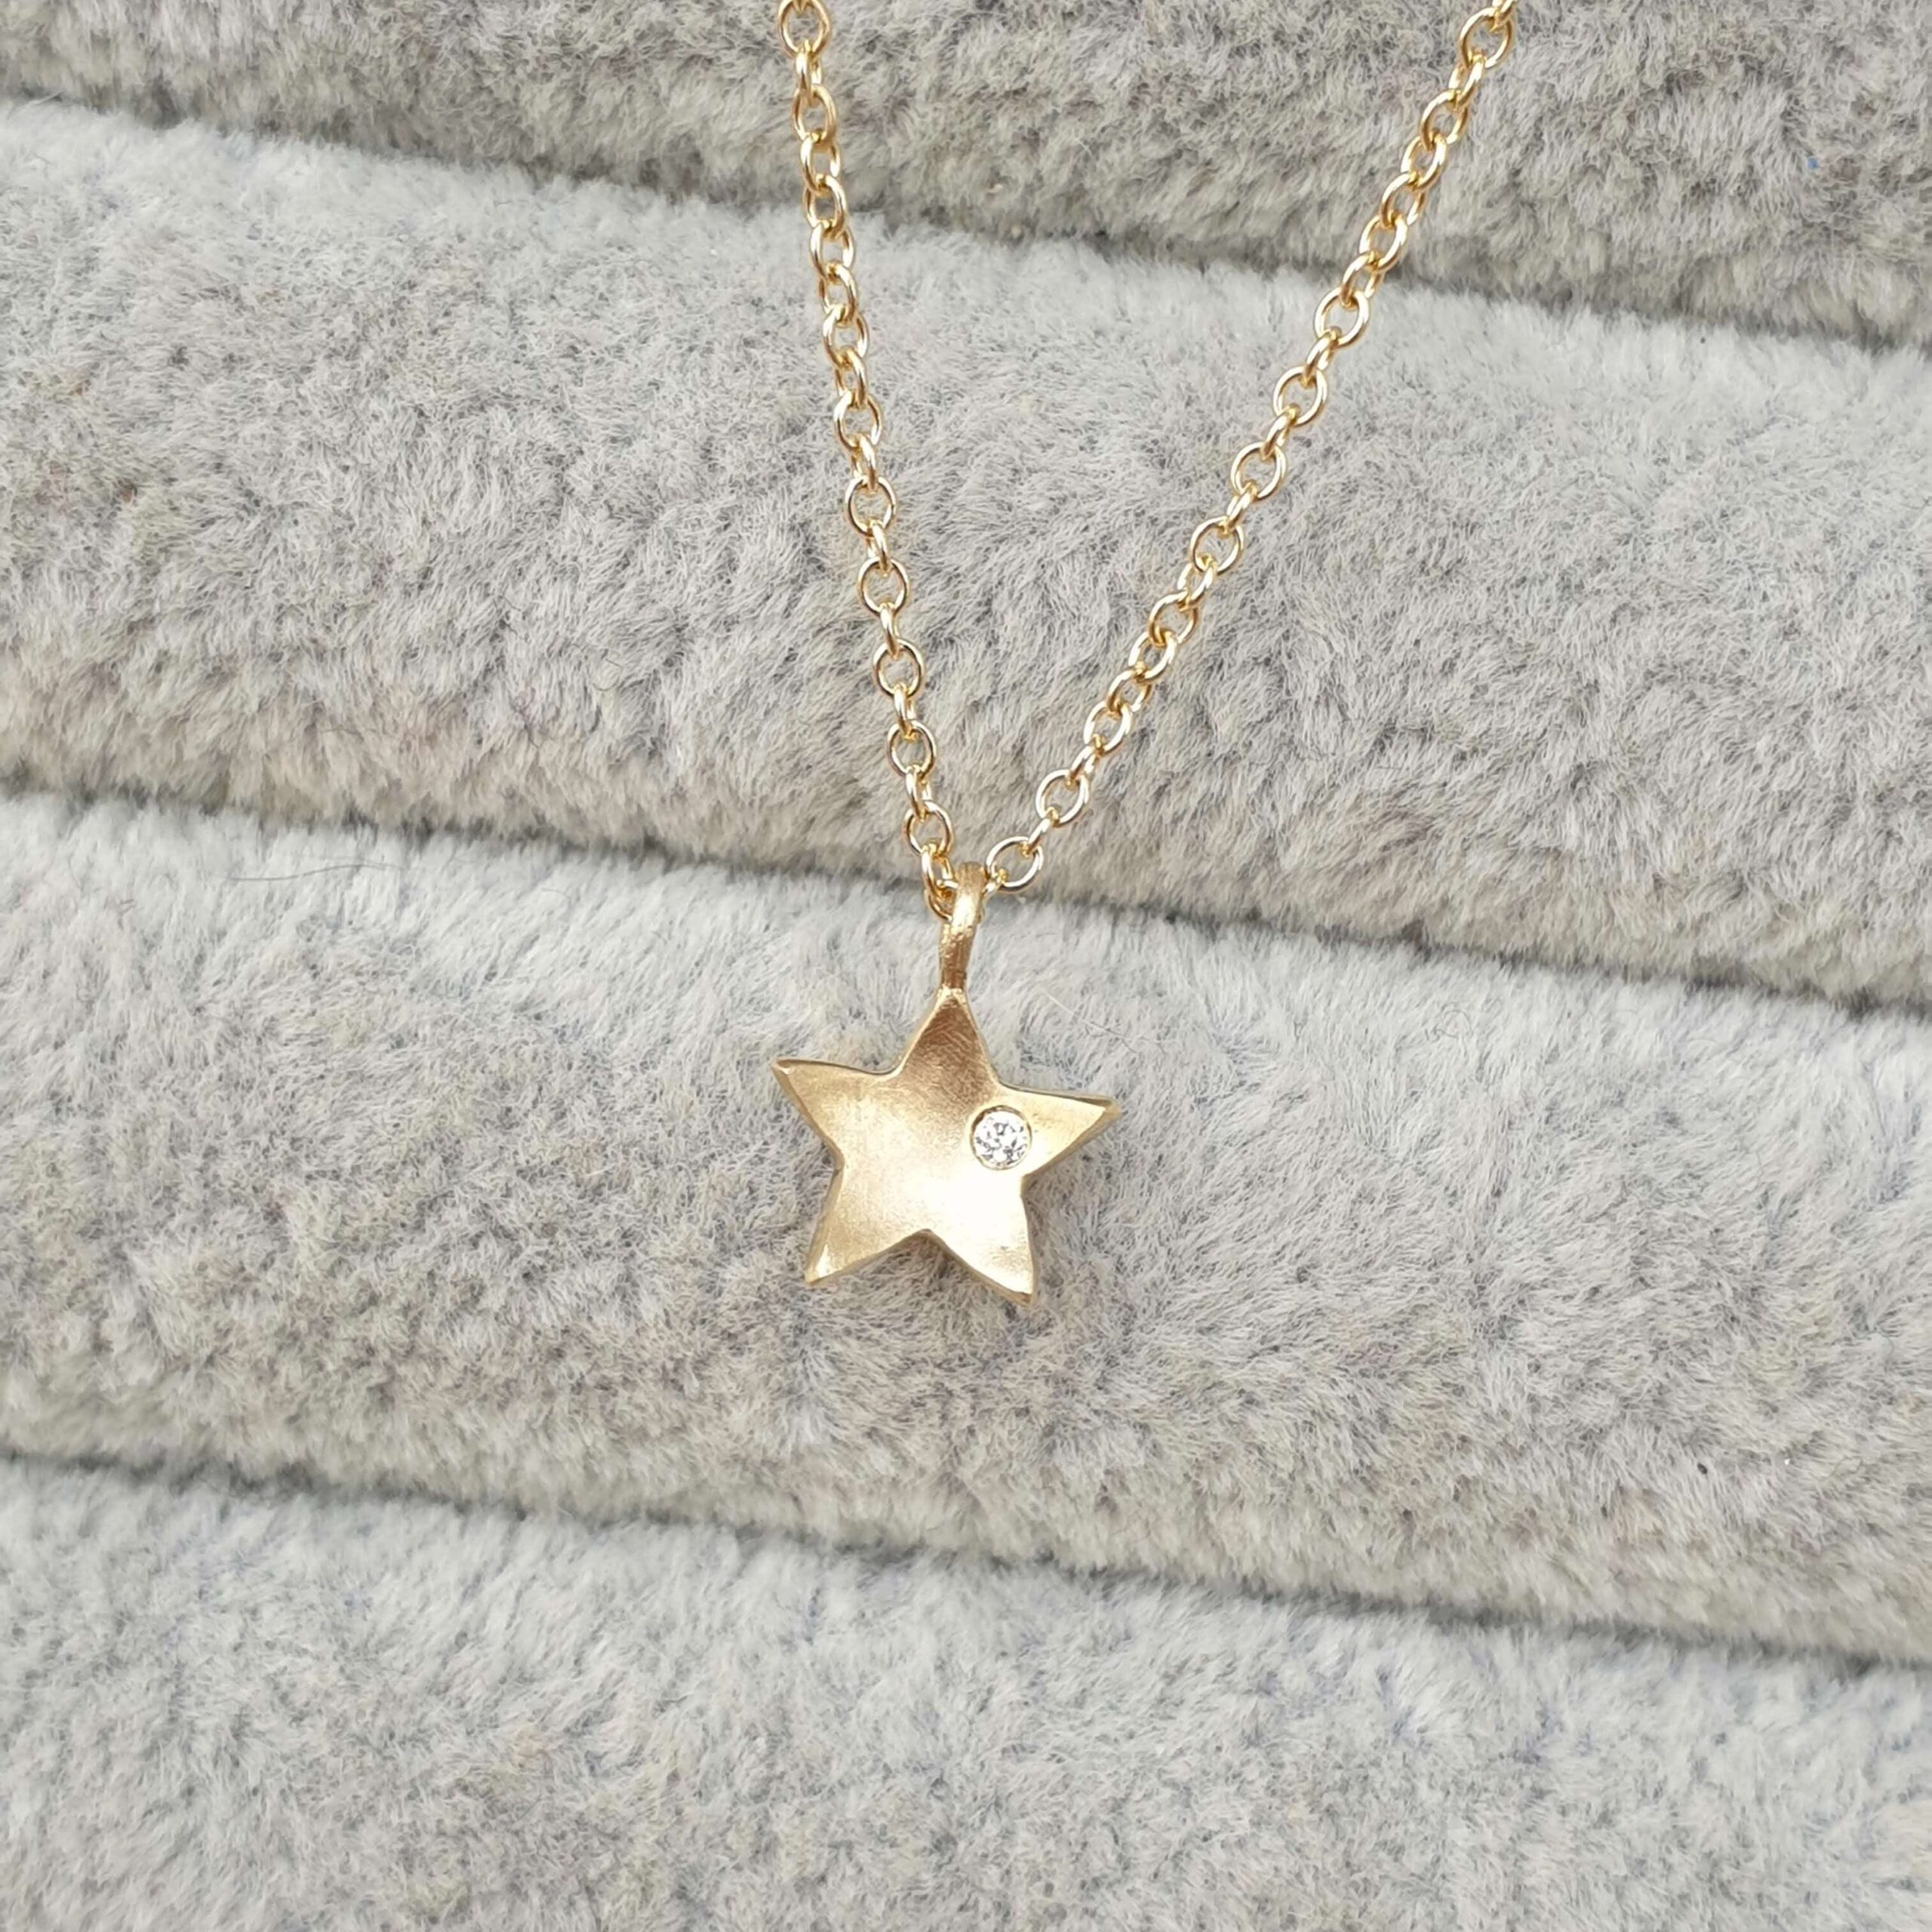 9ct Gold Star Drop Pendant Necklace 16 - 20 Inches | Jewellerybox.co.uk